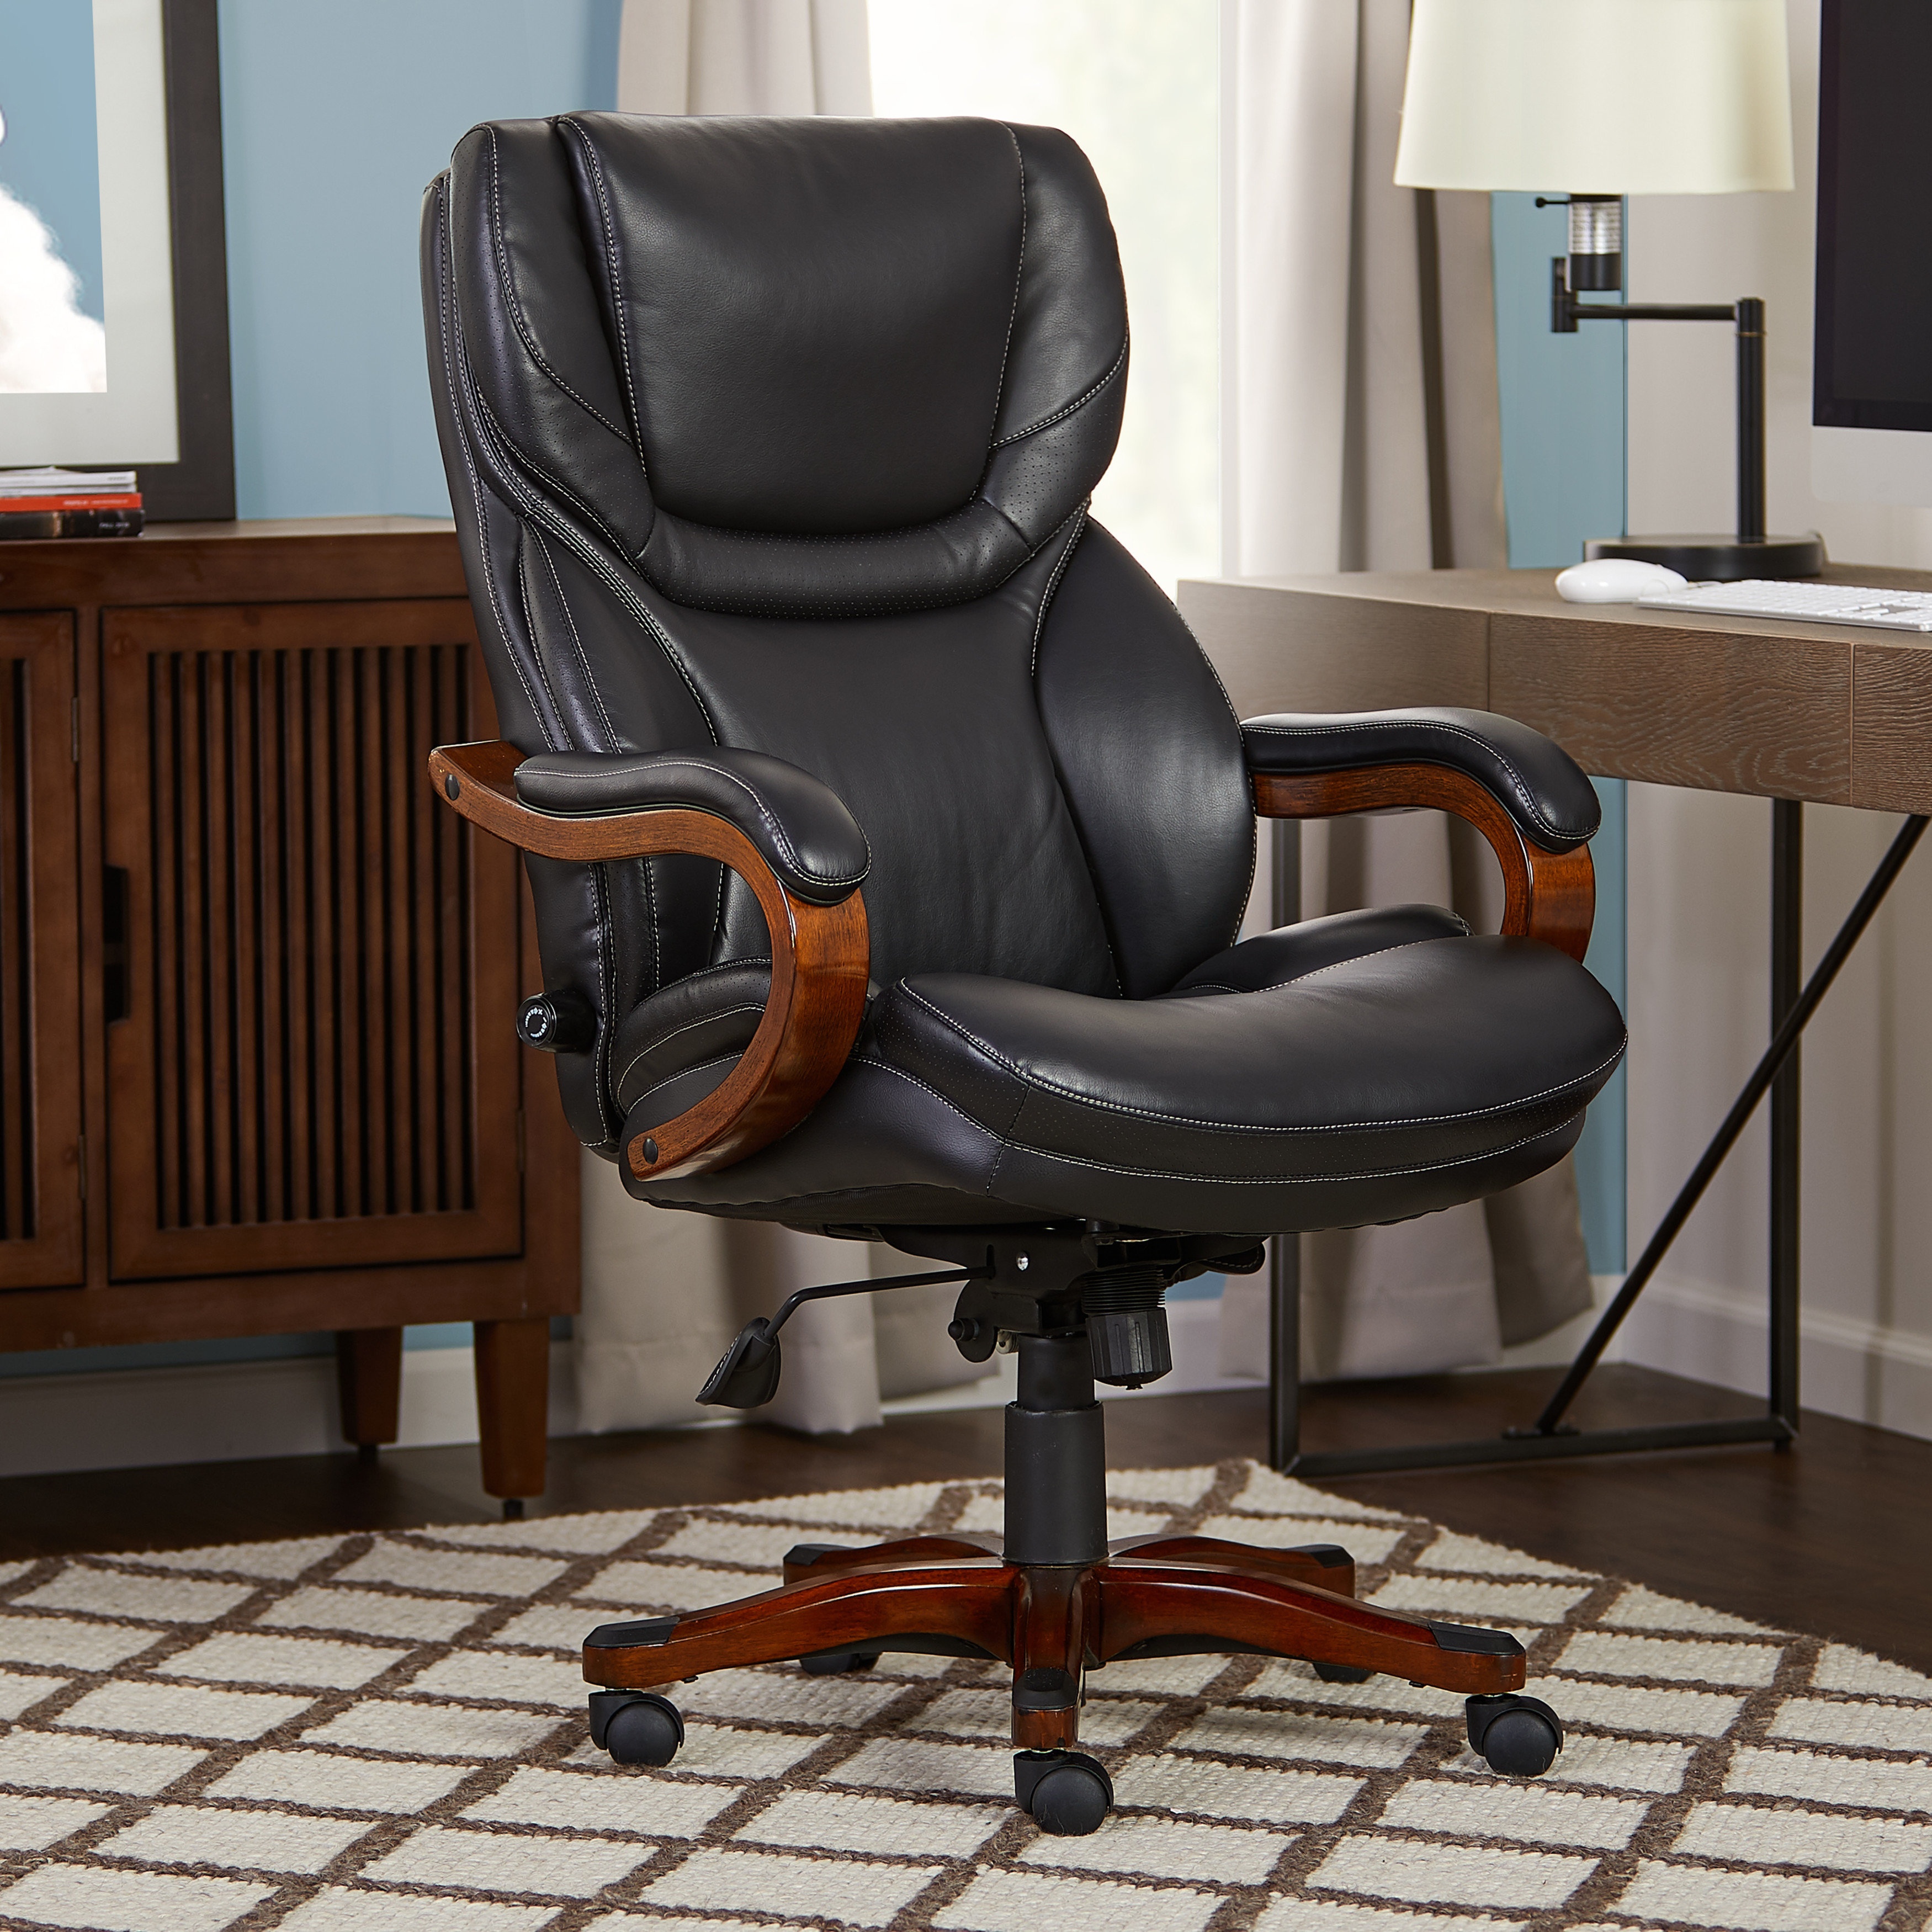 https://visualhunt.com/photos/23/serta-conway-big-and-tall-executive-ergonomic-office-chair-with-lumber-support-and-wood-accents.jpg